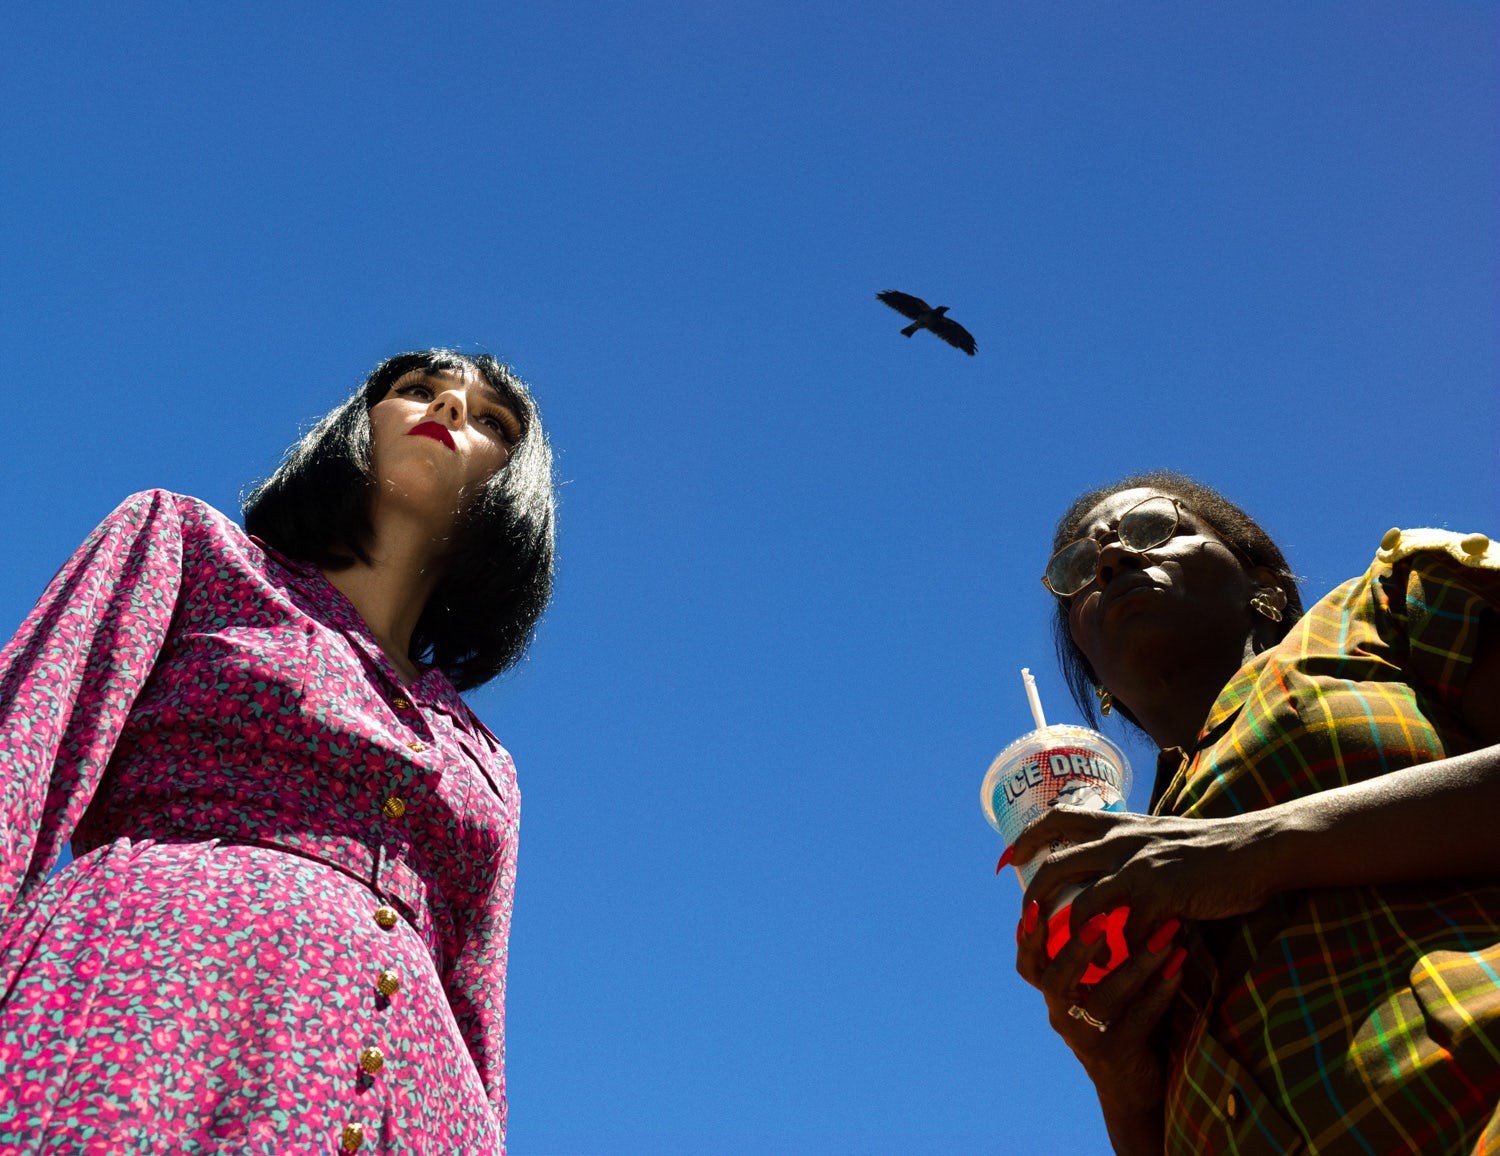 Image by Alex Prager shot from below, featuring one person on the left wearing a floral button-up dress and a bob, next to another person carrying a plastic drink and straw, with a bird flying between them overhead